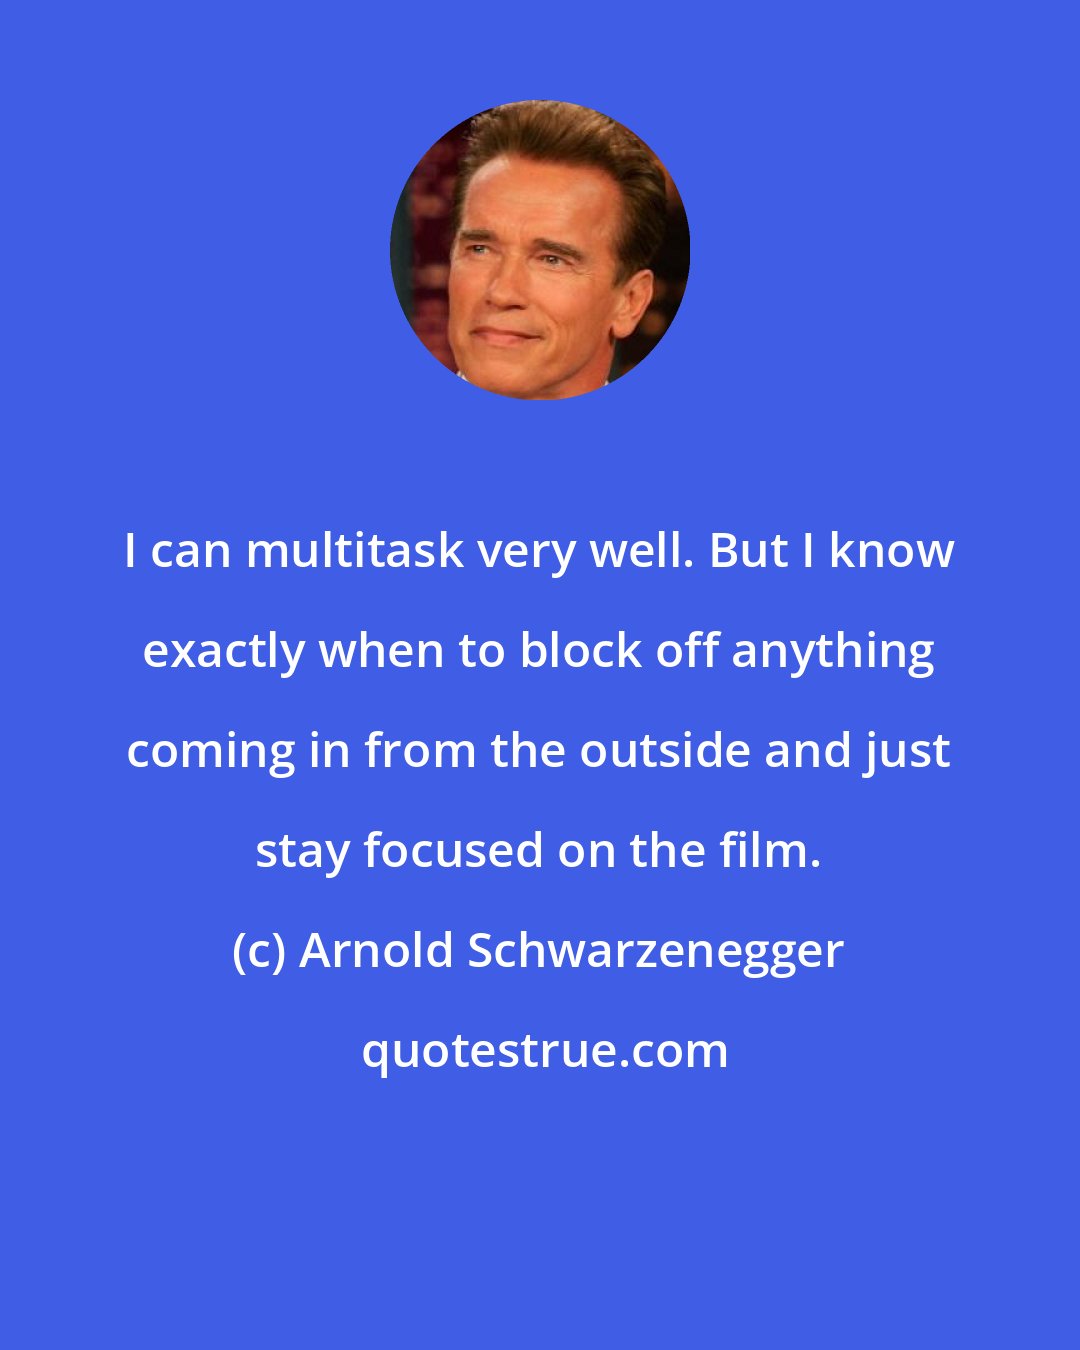 Arnold Schwarzenegger: I can multitask very well. But I know exactly when to block off anything coming in from the outside and just stay focused on the film.